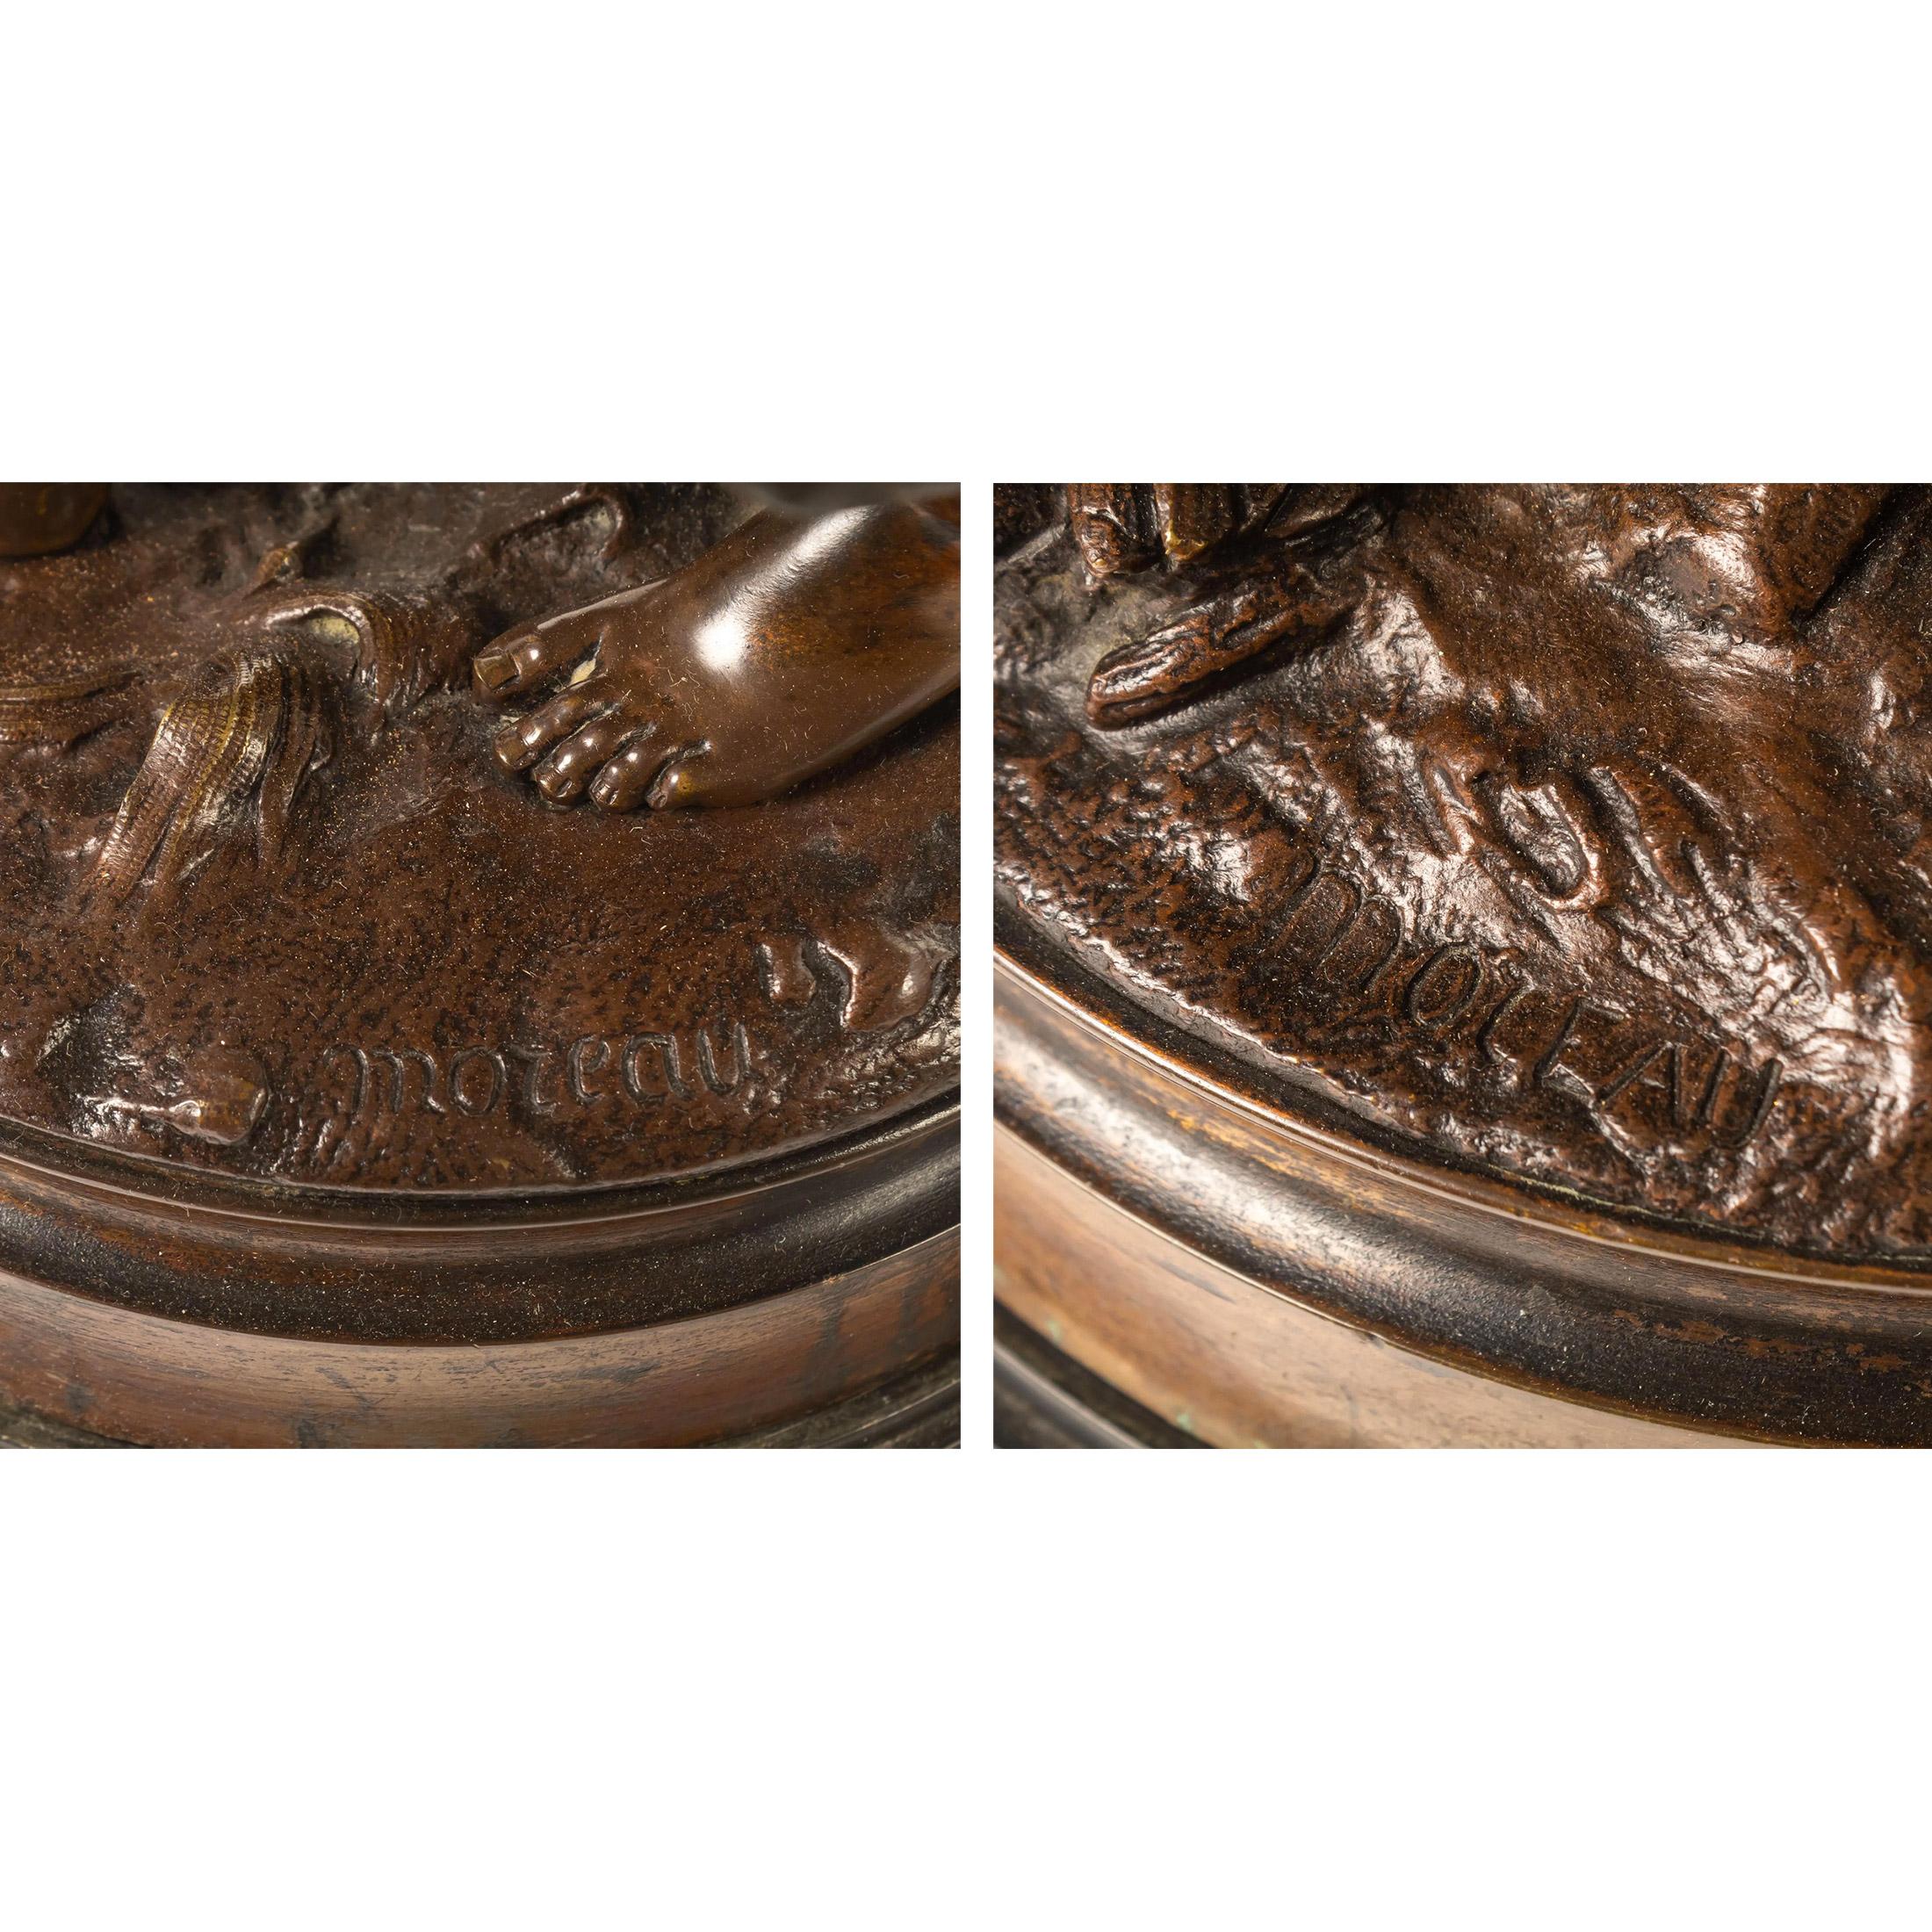 HIPPOLYTE FRANÇOIS MOREAU  
French, (1832-1927)

‘Eaves Dropping’ and ‘Consolation’

Patinated bronze; signed ‘Moreau’ 
25 x 11 inches